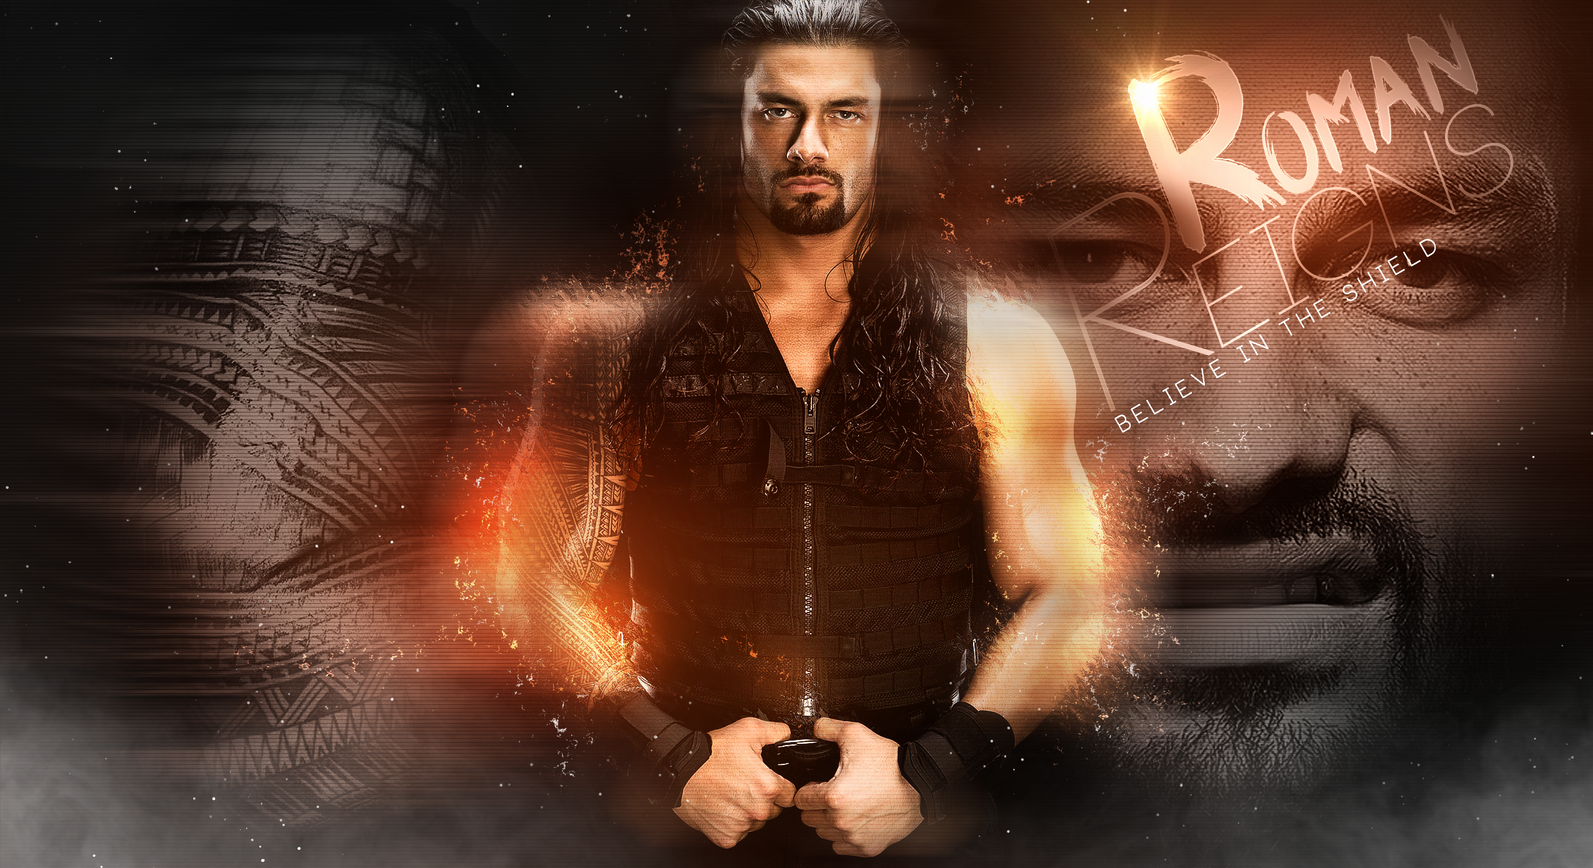 Roman Reigns fighter WWE wallpaper - Free download and software reviews -  CNET Download